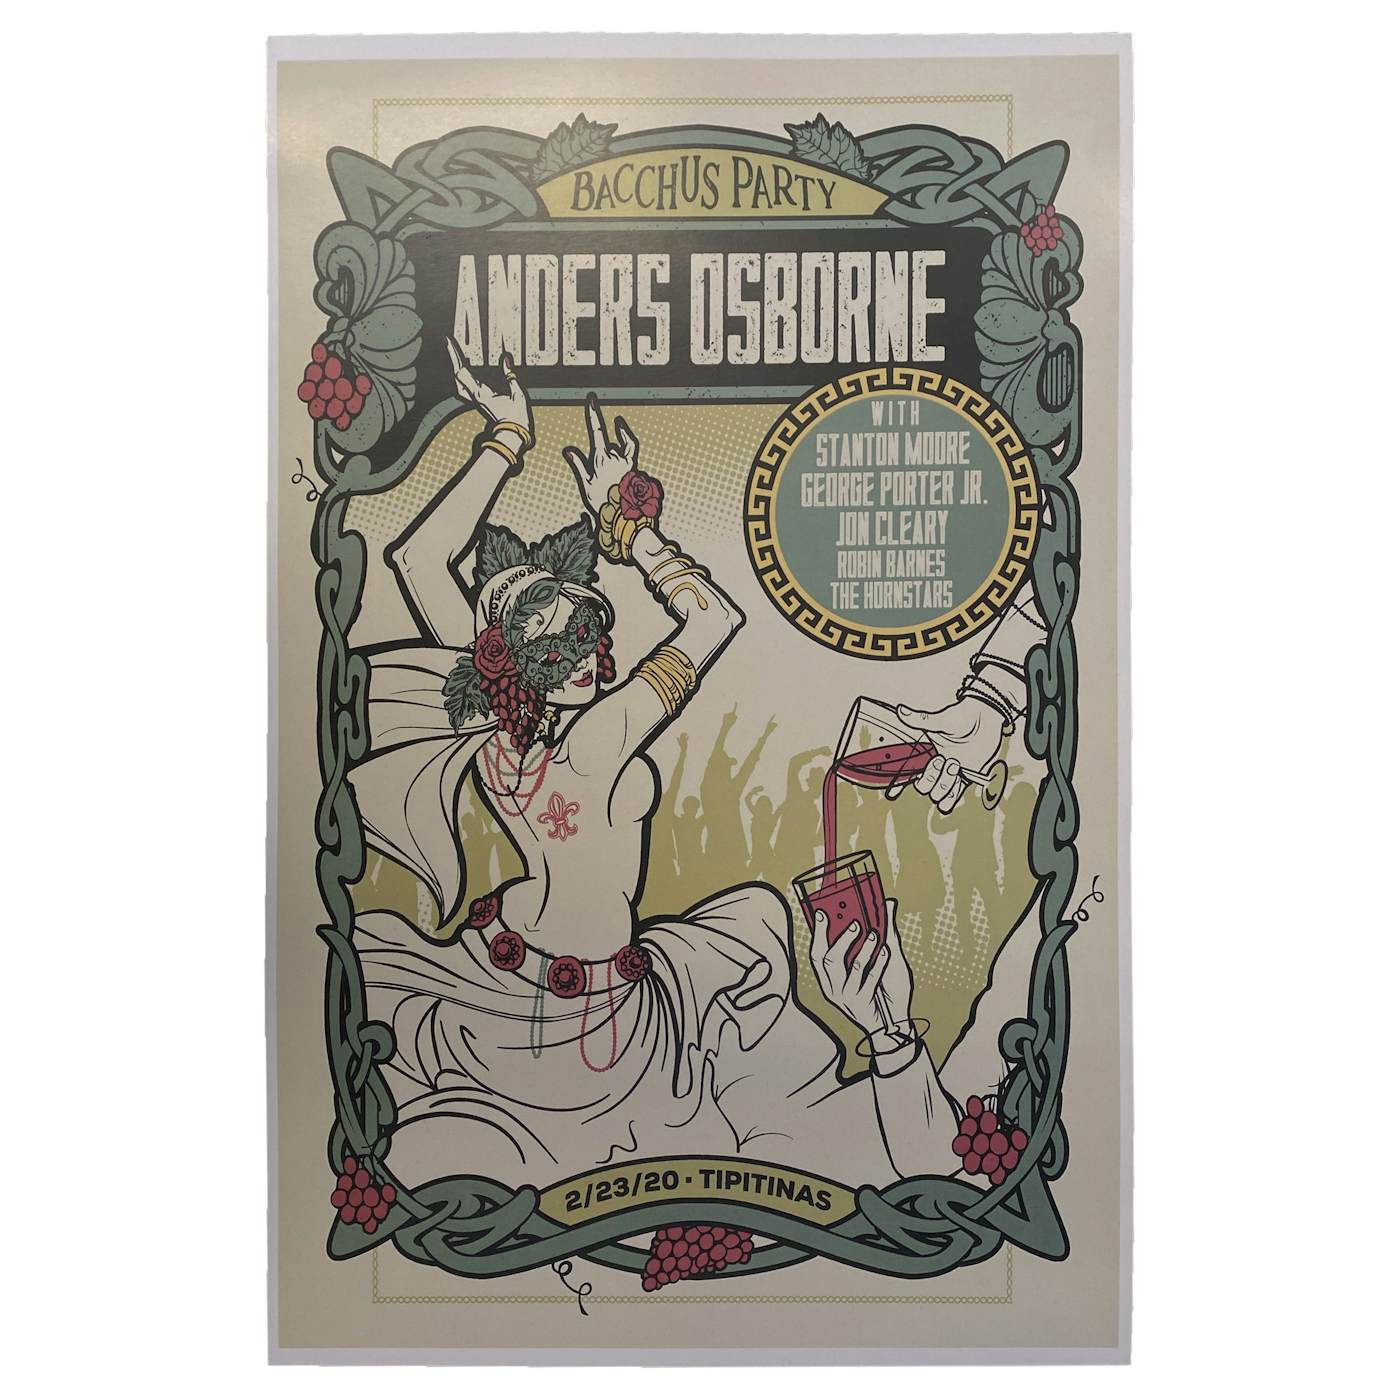 Anders Osborne Bacchus Party 2020 Poster